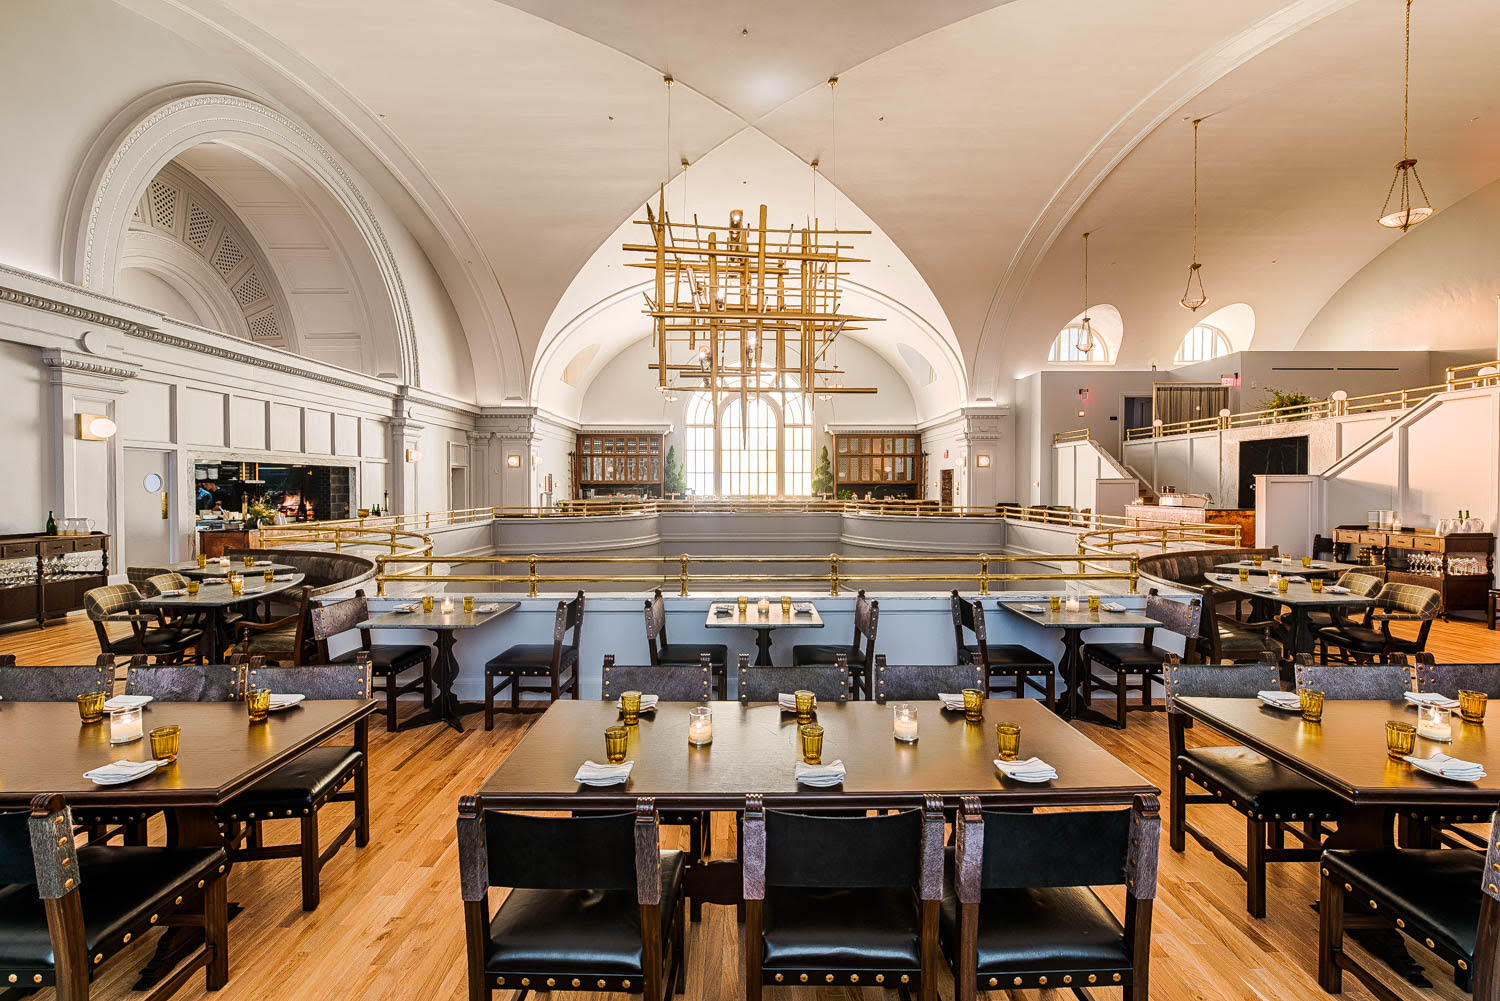 A Rake’s Progress has vacated the top-floor dining space of the Line hotel in Adams Morgan